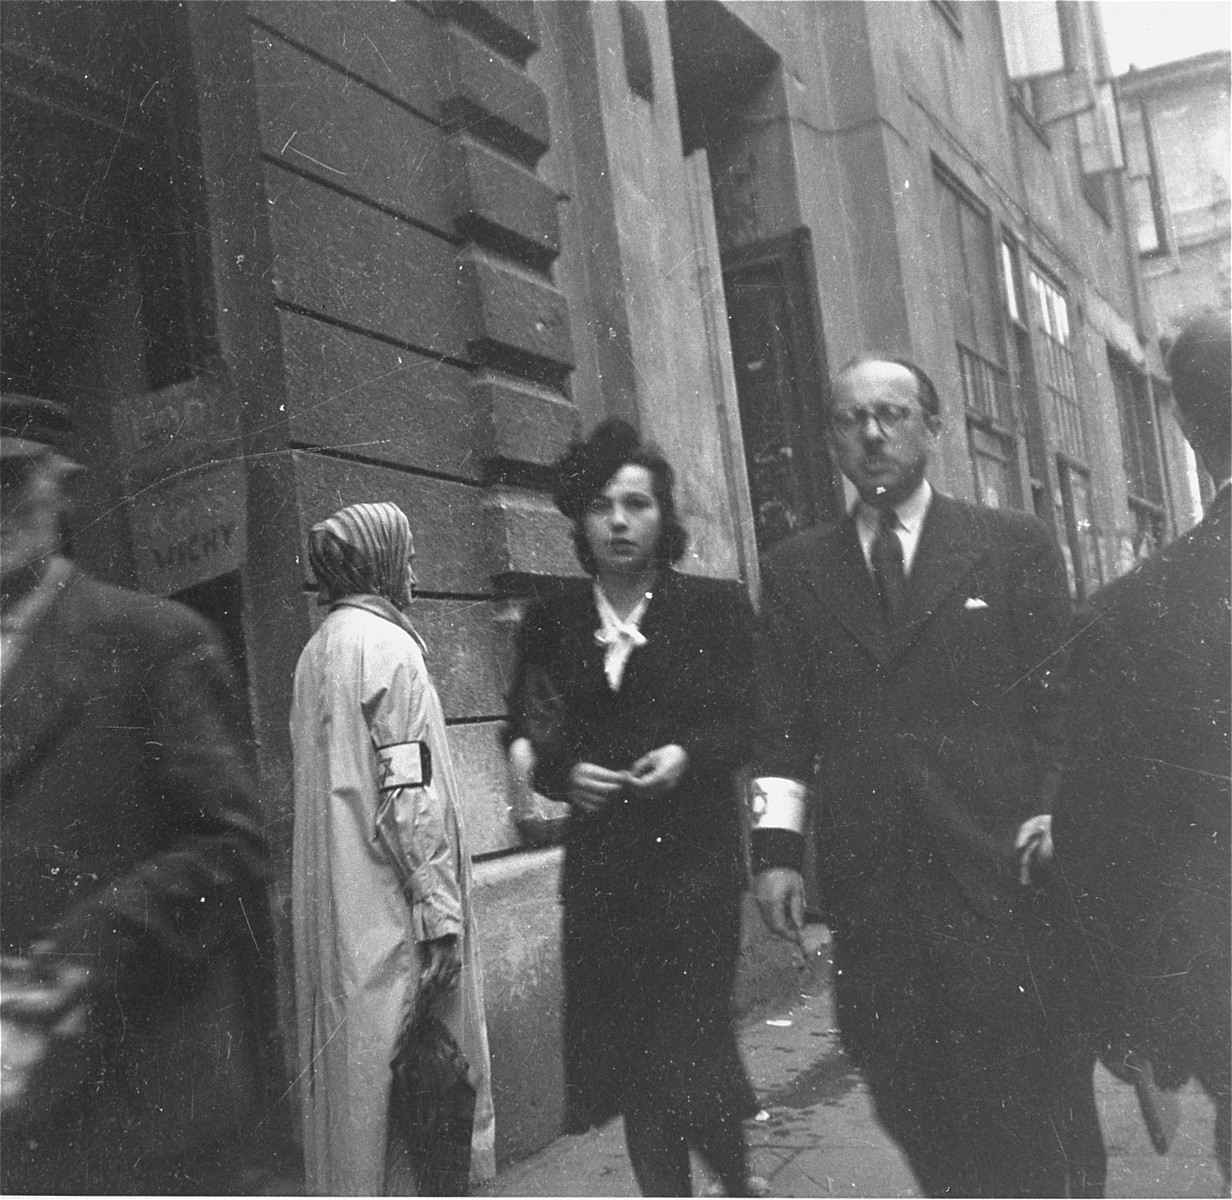 A well-dressed couple on the street in the Warsaw ghetto.  

Joest's original caption reads: "I was amazed that in the ghetto I occasionally met "better people" like this man with his pocket hankerchief and umbrella and his fashionably dressed wife with a hat and jewelry.  I asked myself how they were able to live, and a year later, I asked myself if they were still alive."